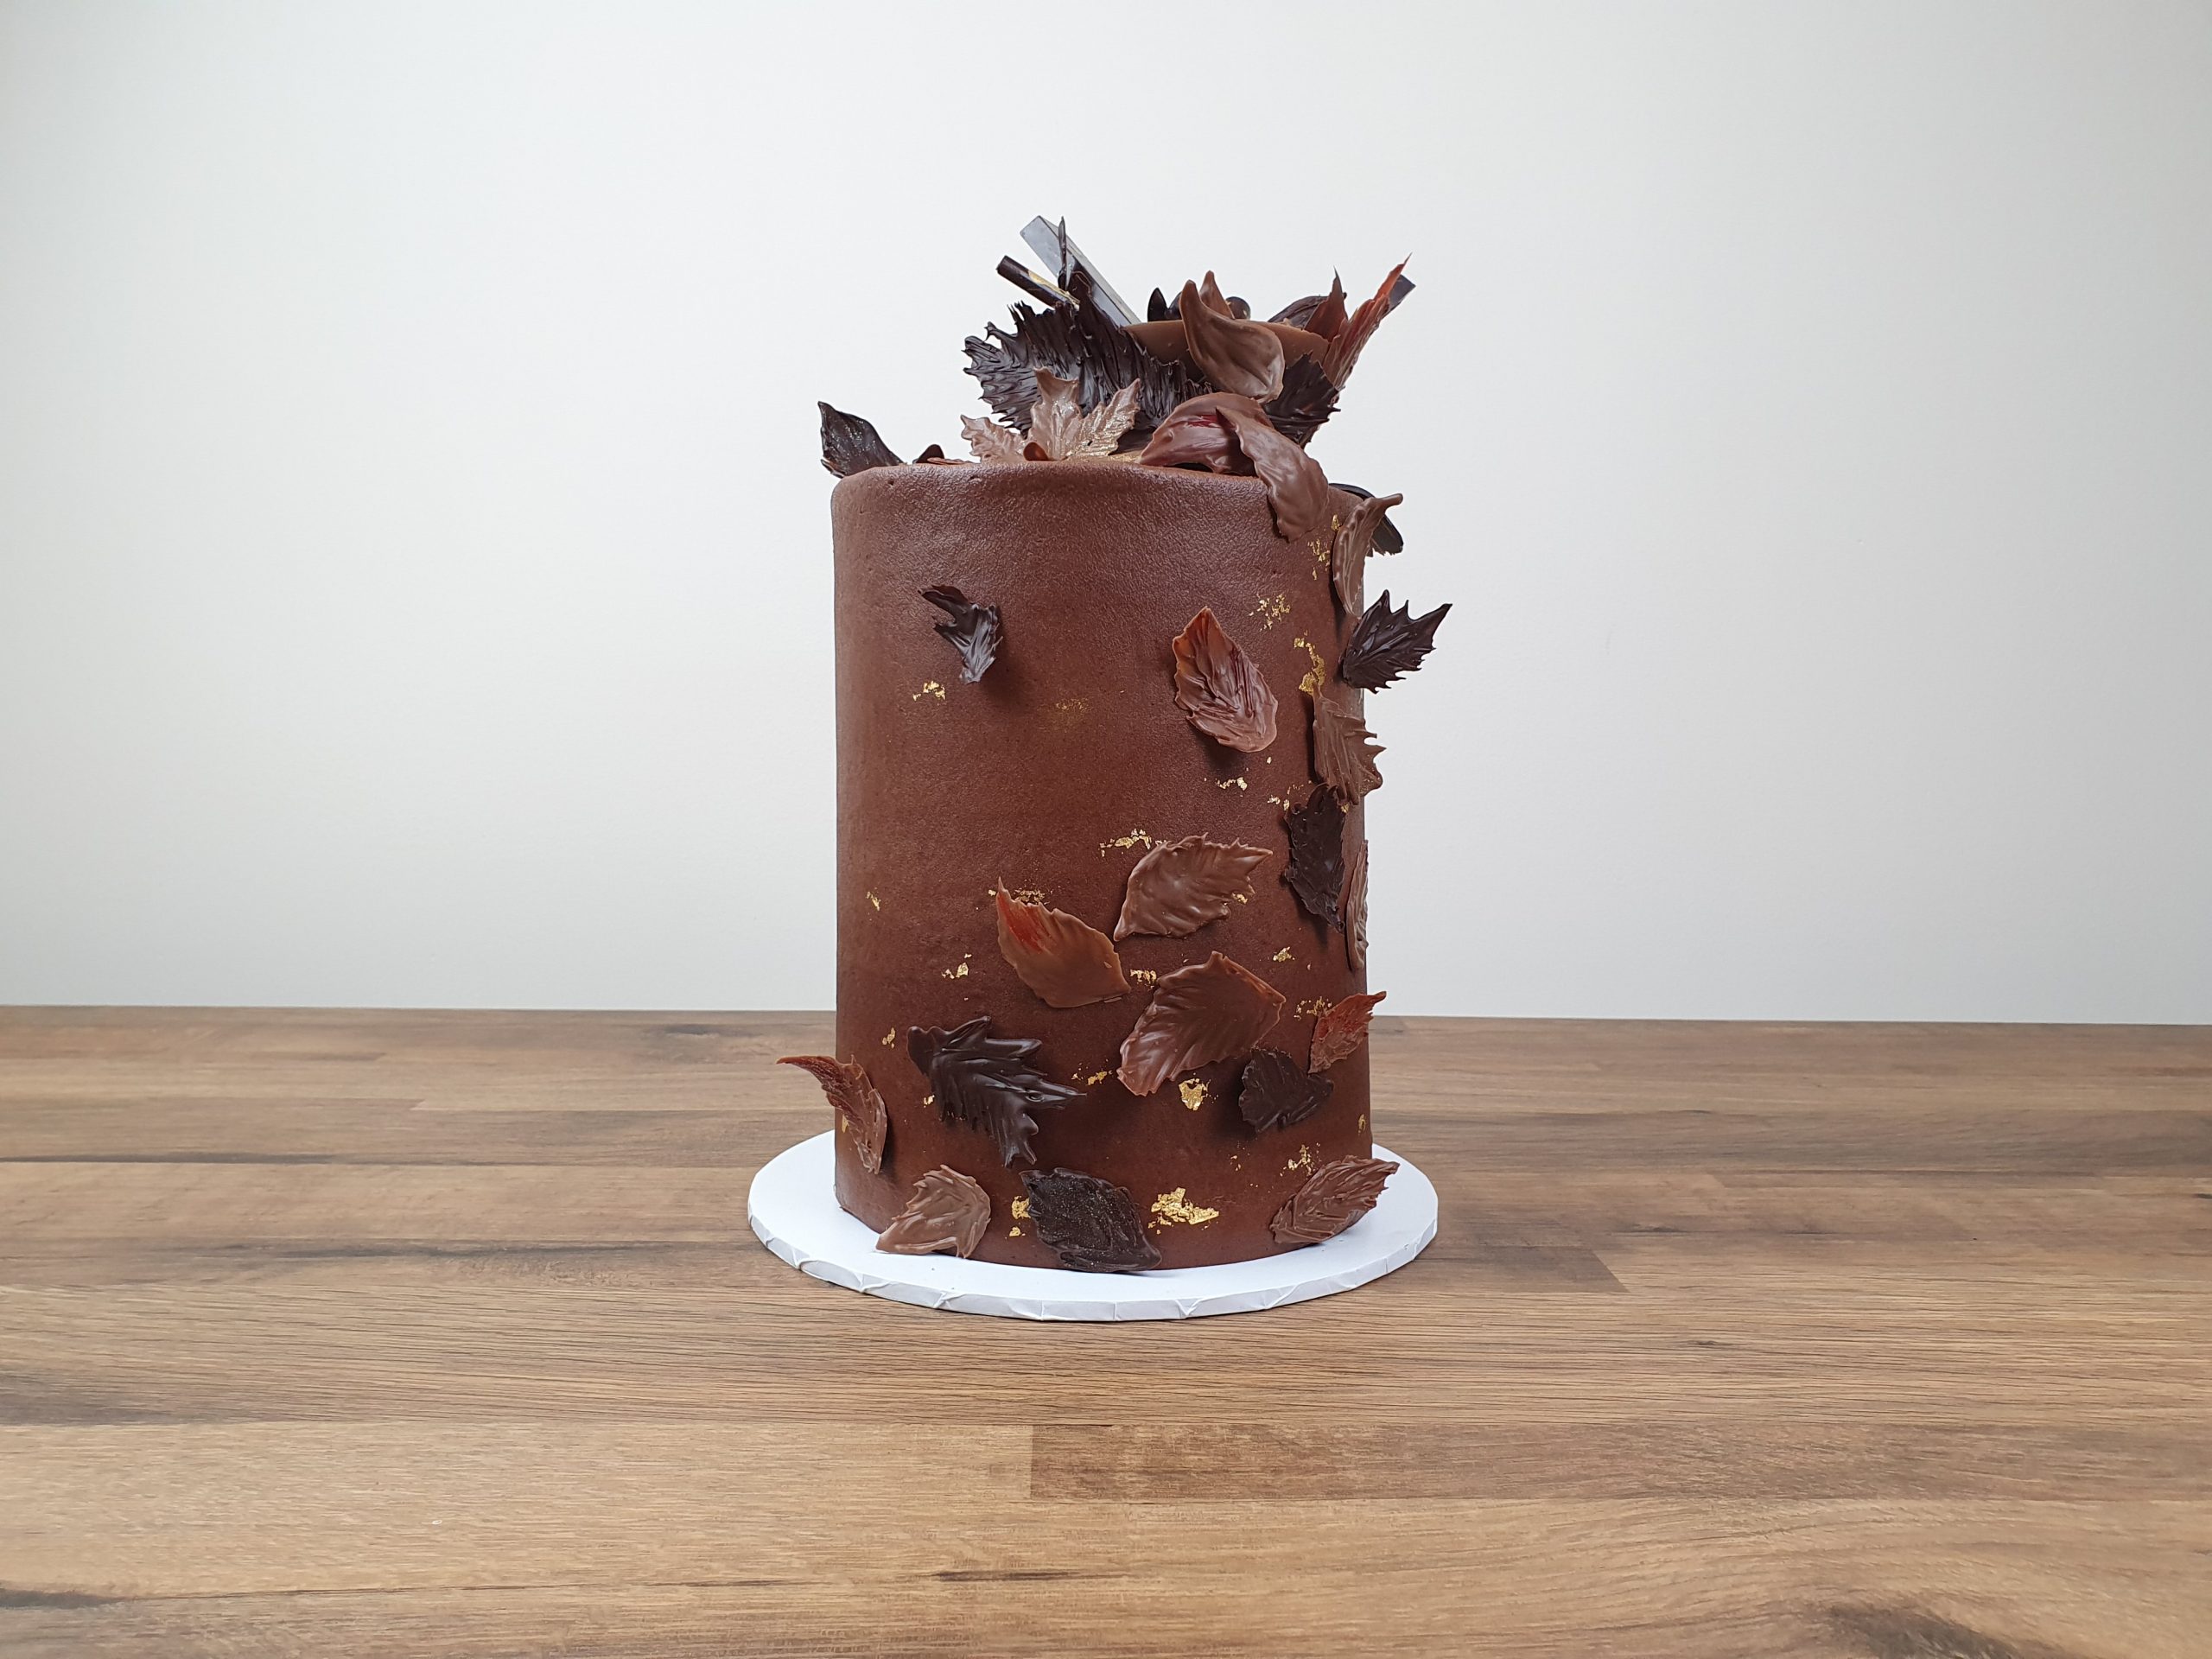 Autumn Leaves Cake by RiceCakes